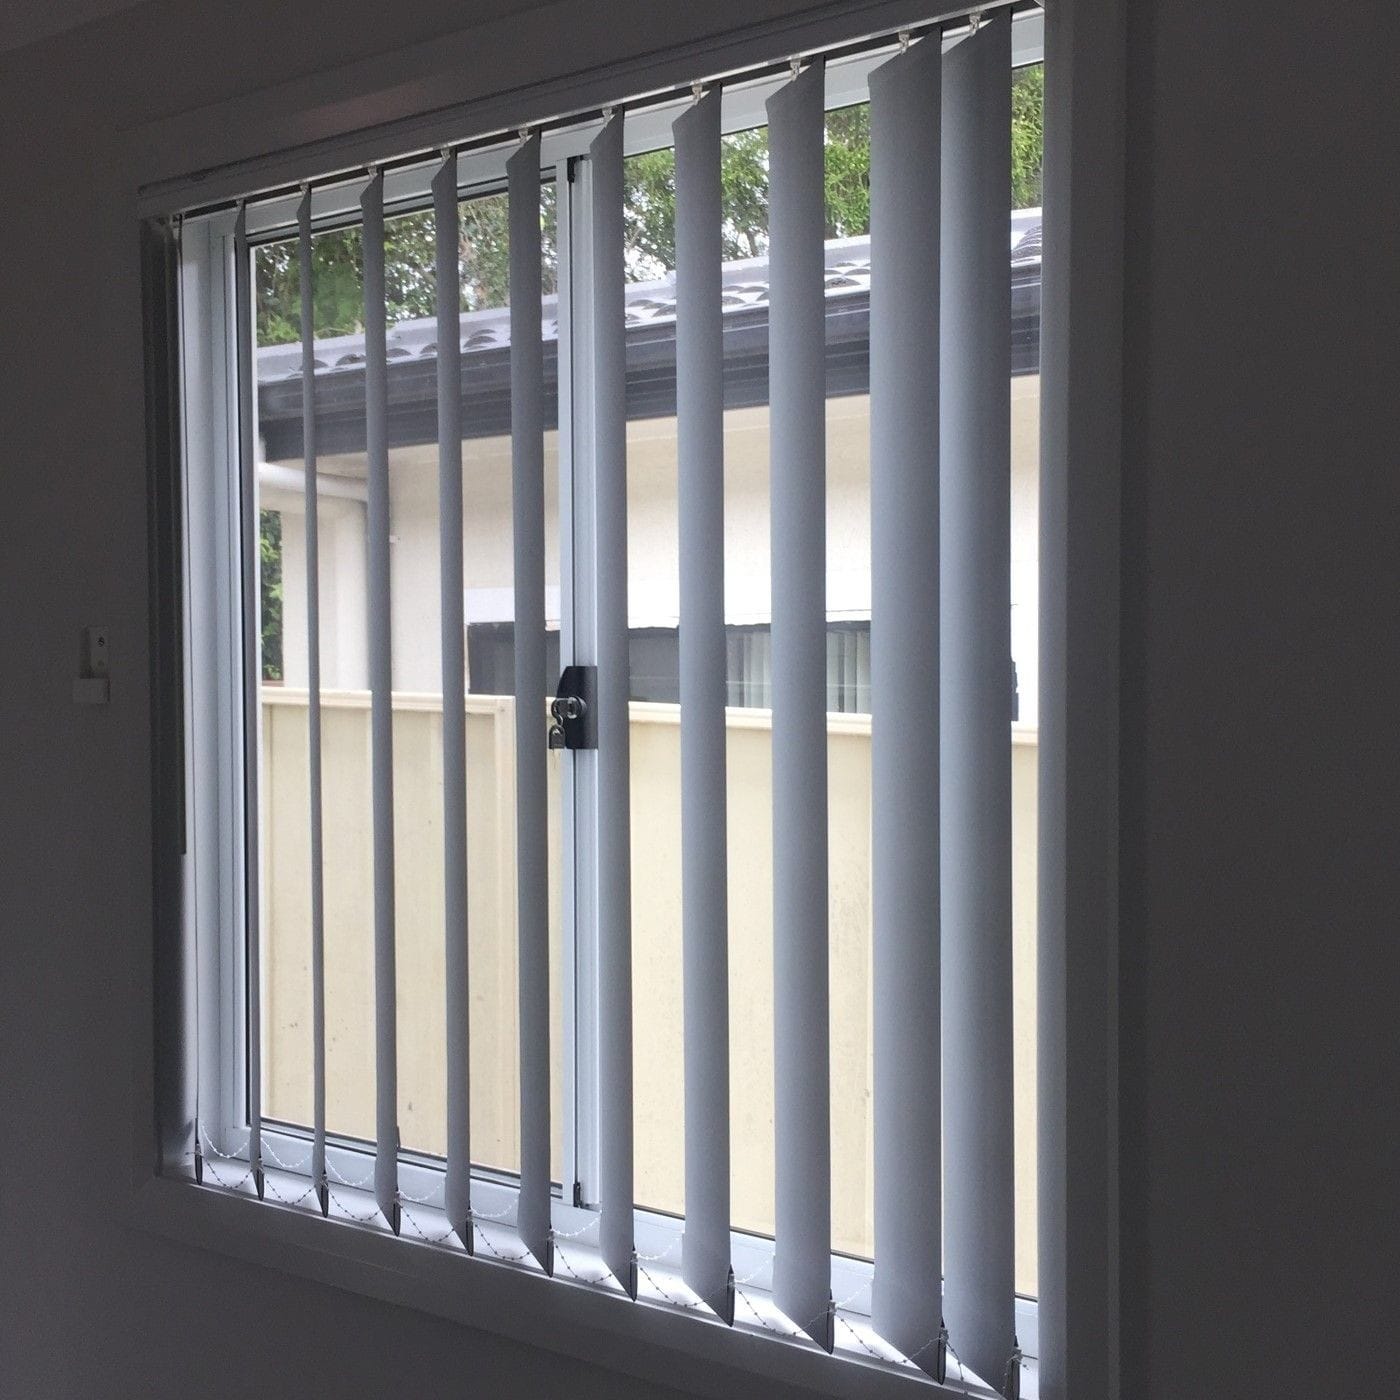 Vertical Blinds are custom-made to fit your window using high-quality fabrics such as Blockout or Sheer. This product offers Vertical Blinds using 127 mm slats.